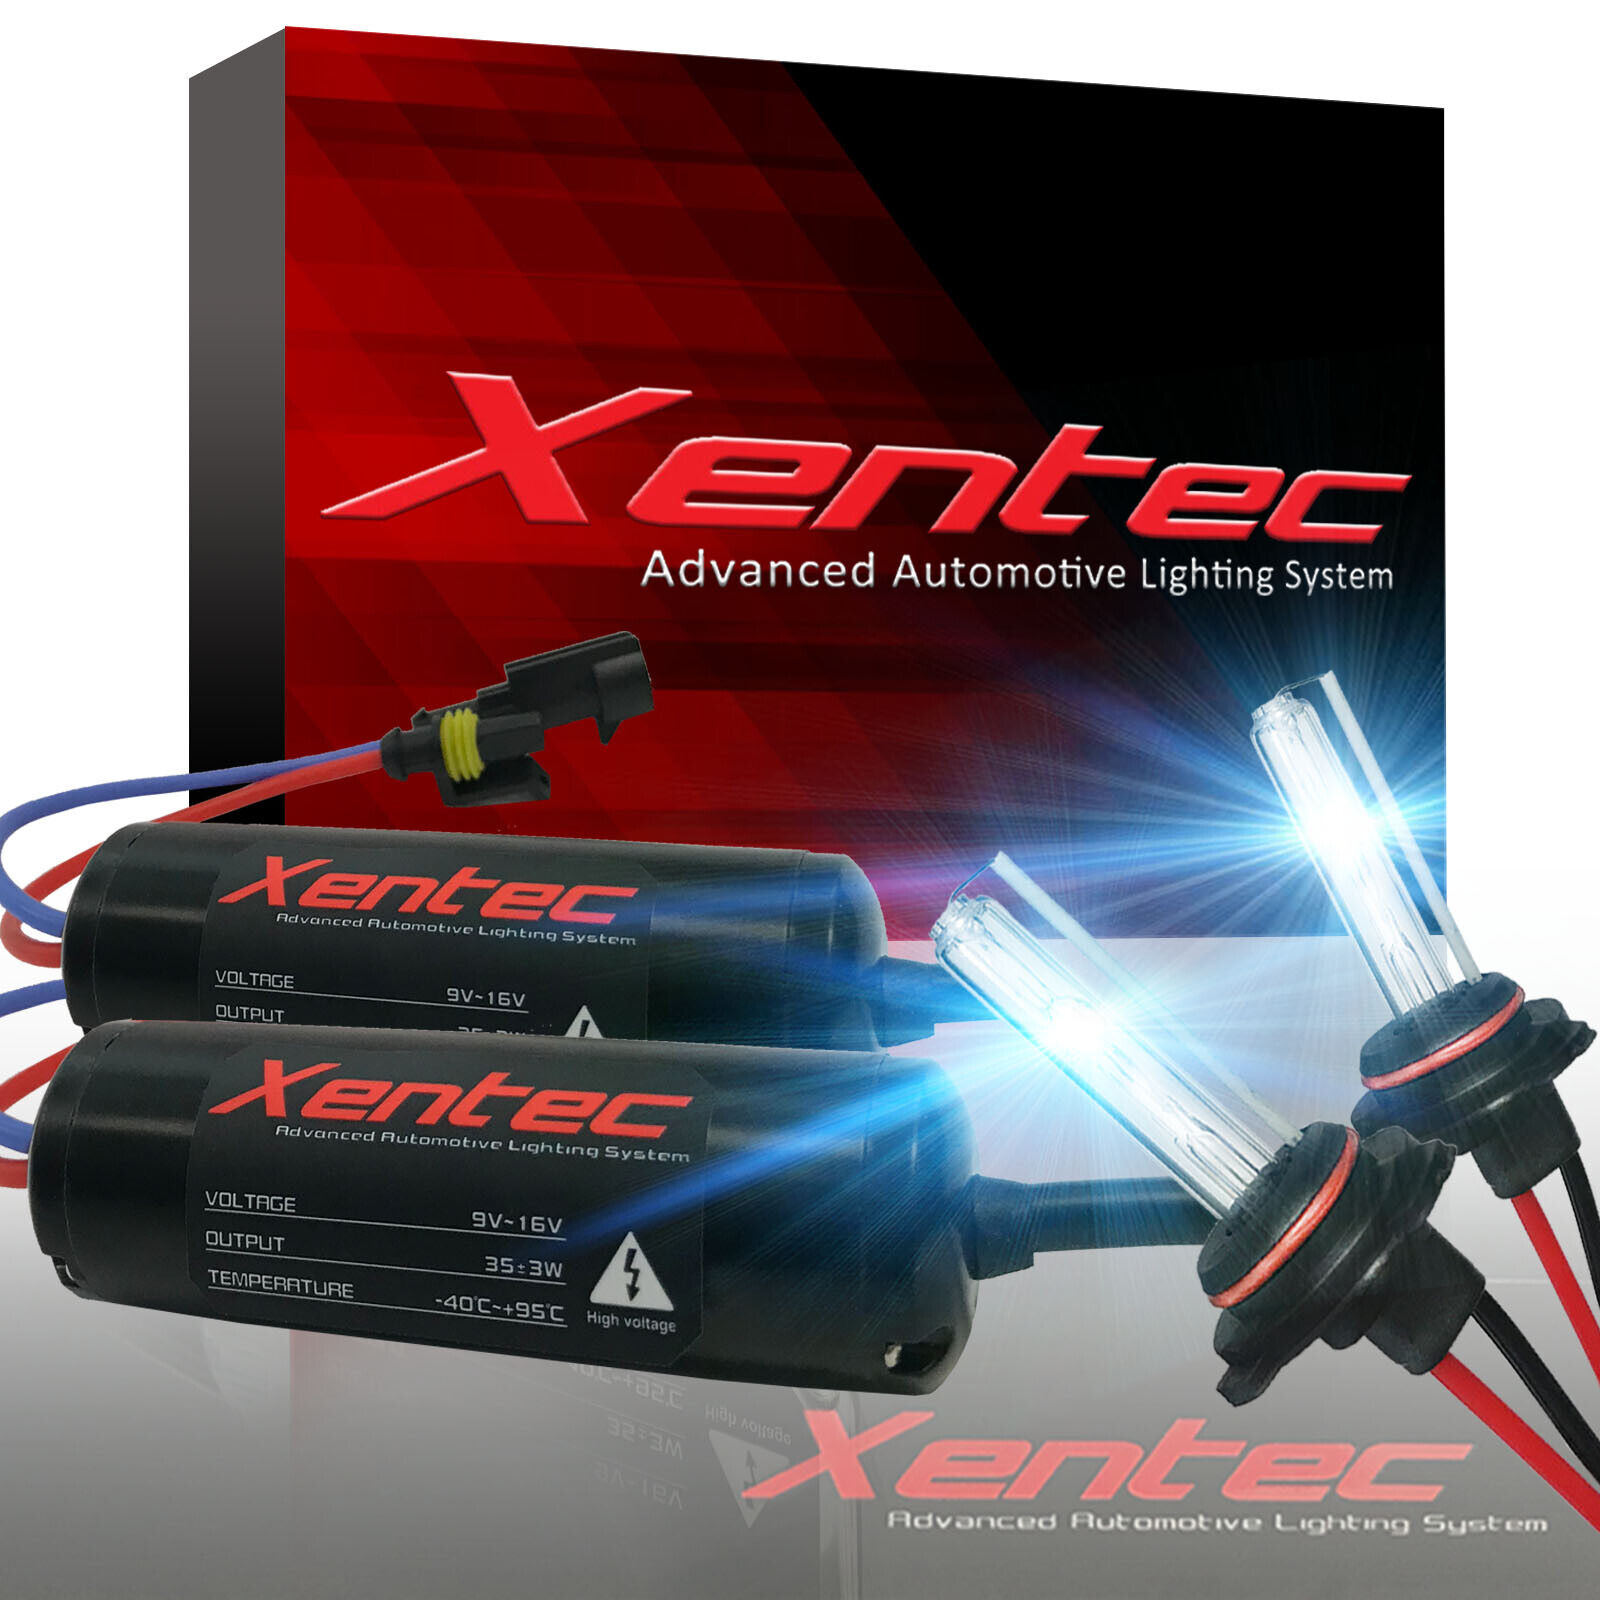 Xentec HID Conversion Kit Xenon Light H11 9006 for Ford Mustang Ranger Mustang